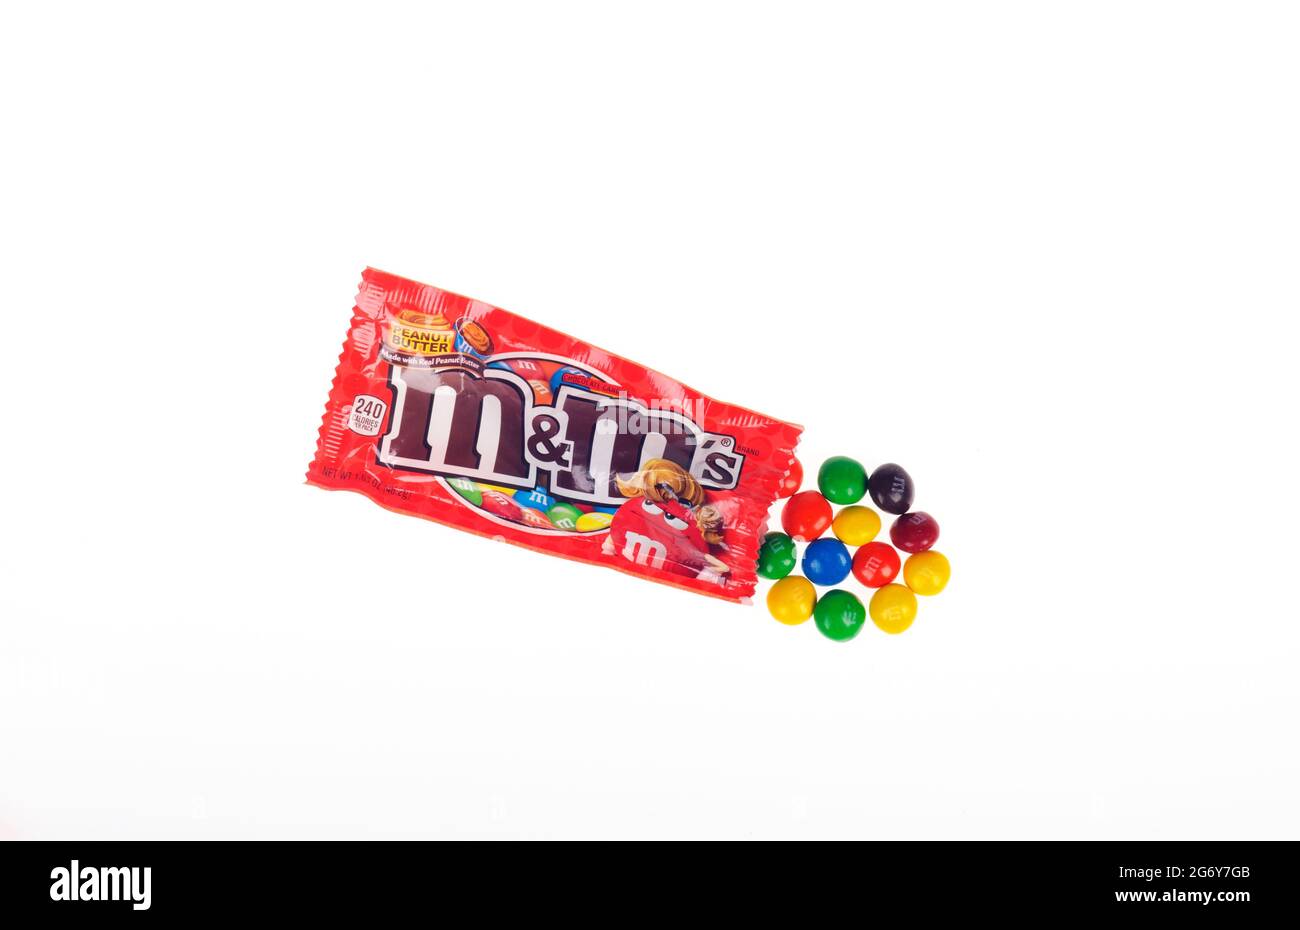 M&m's Peanut Butter Candy Packet Open On White Banque D'Images